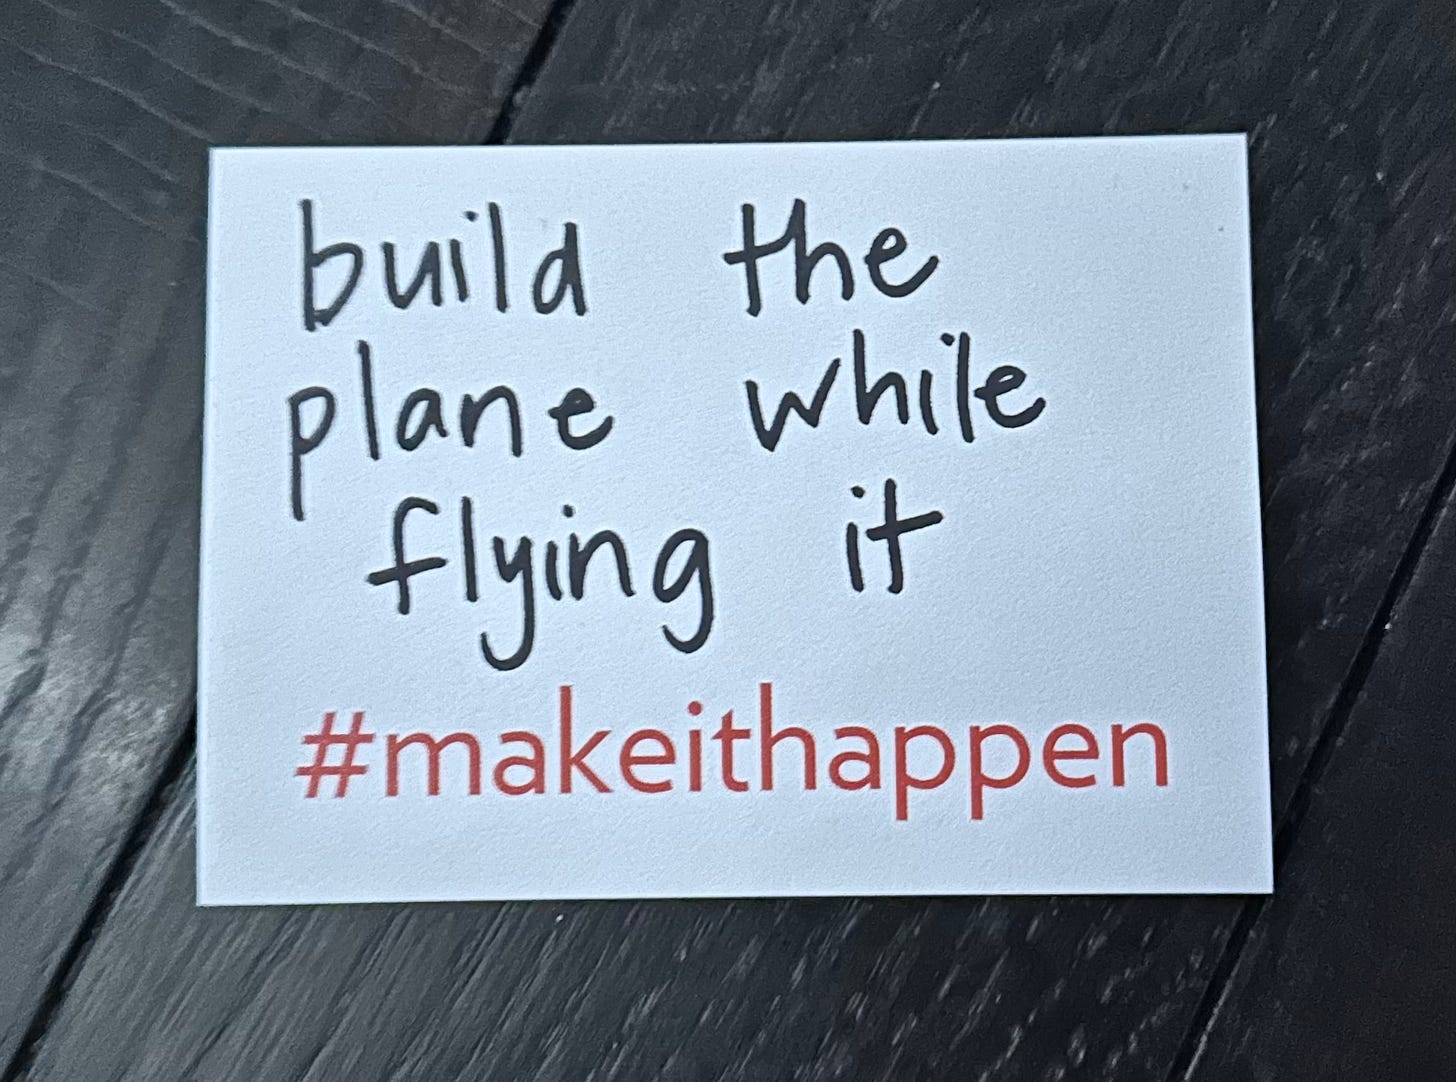 a photo of a sticky note that has, “build the plane while flying it” written on it and includes #makeithappen preprinted on the bottom